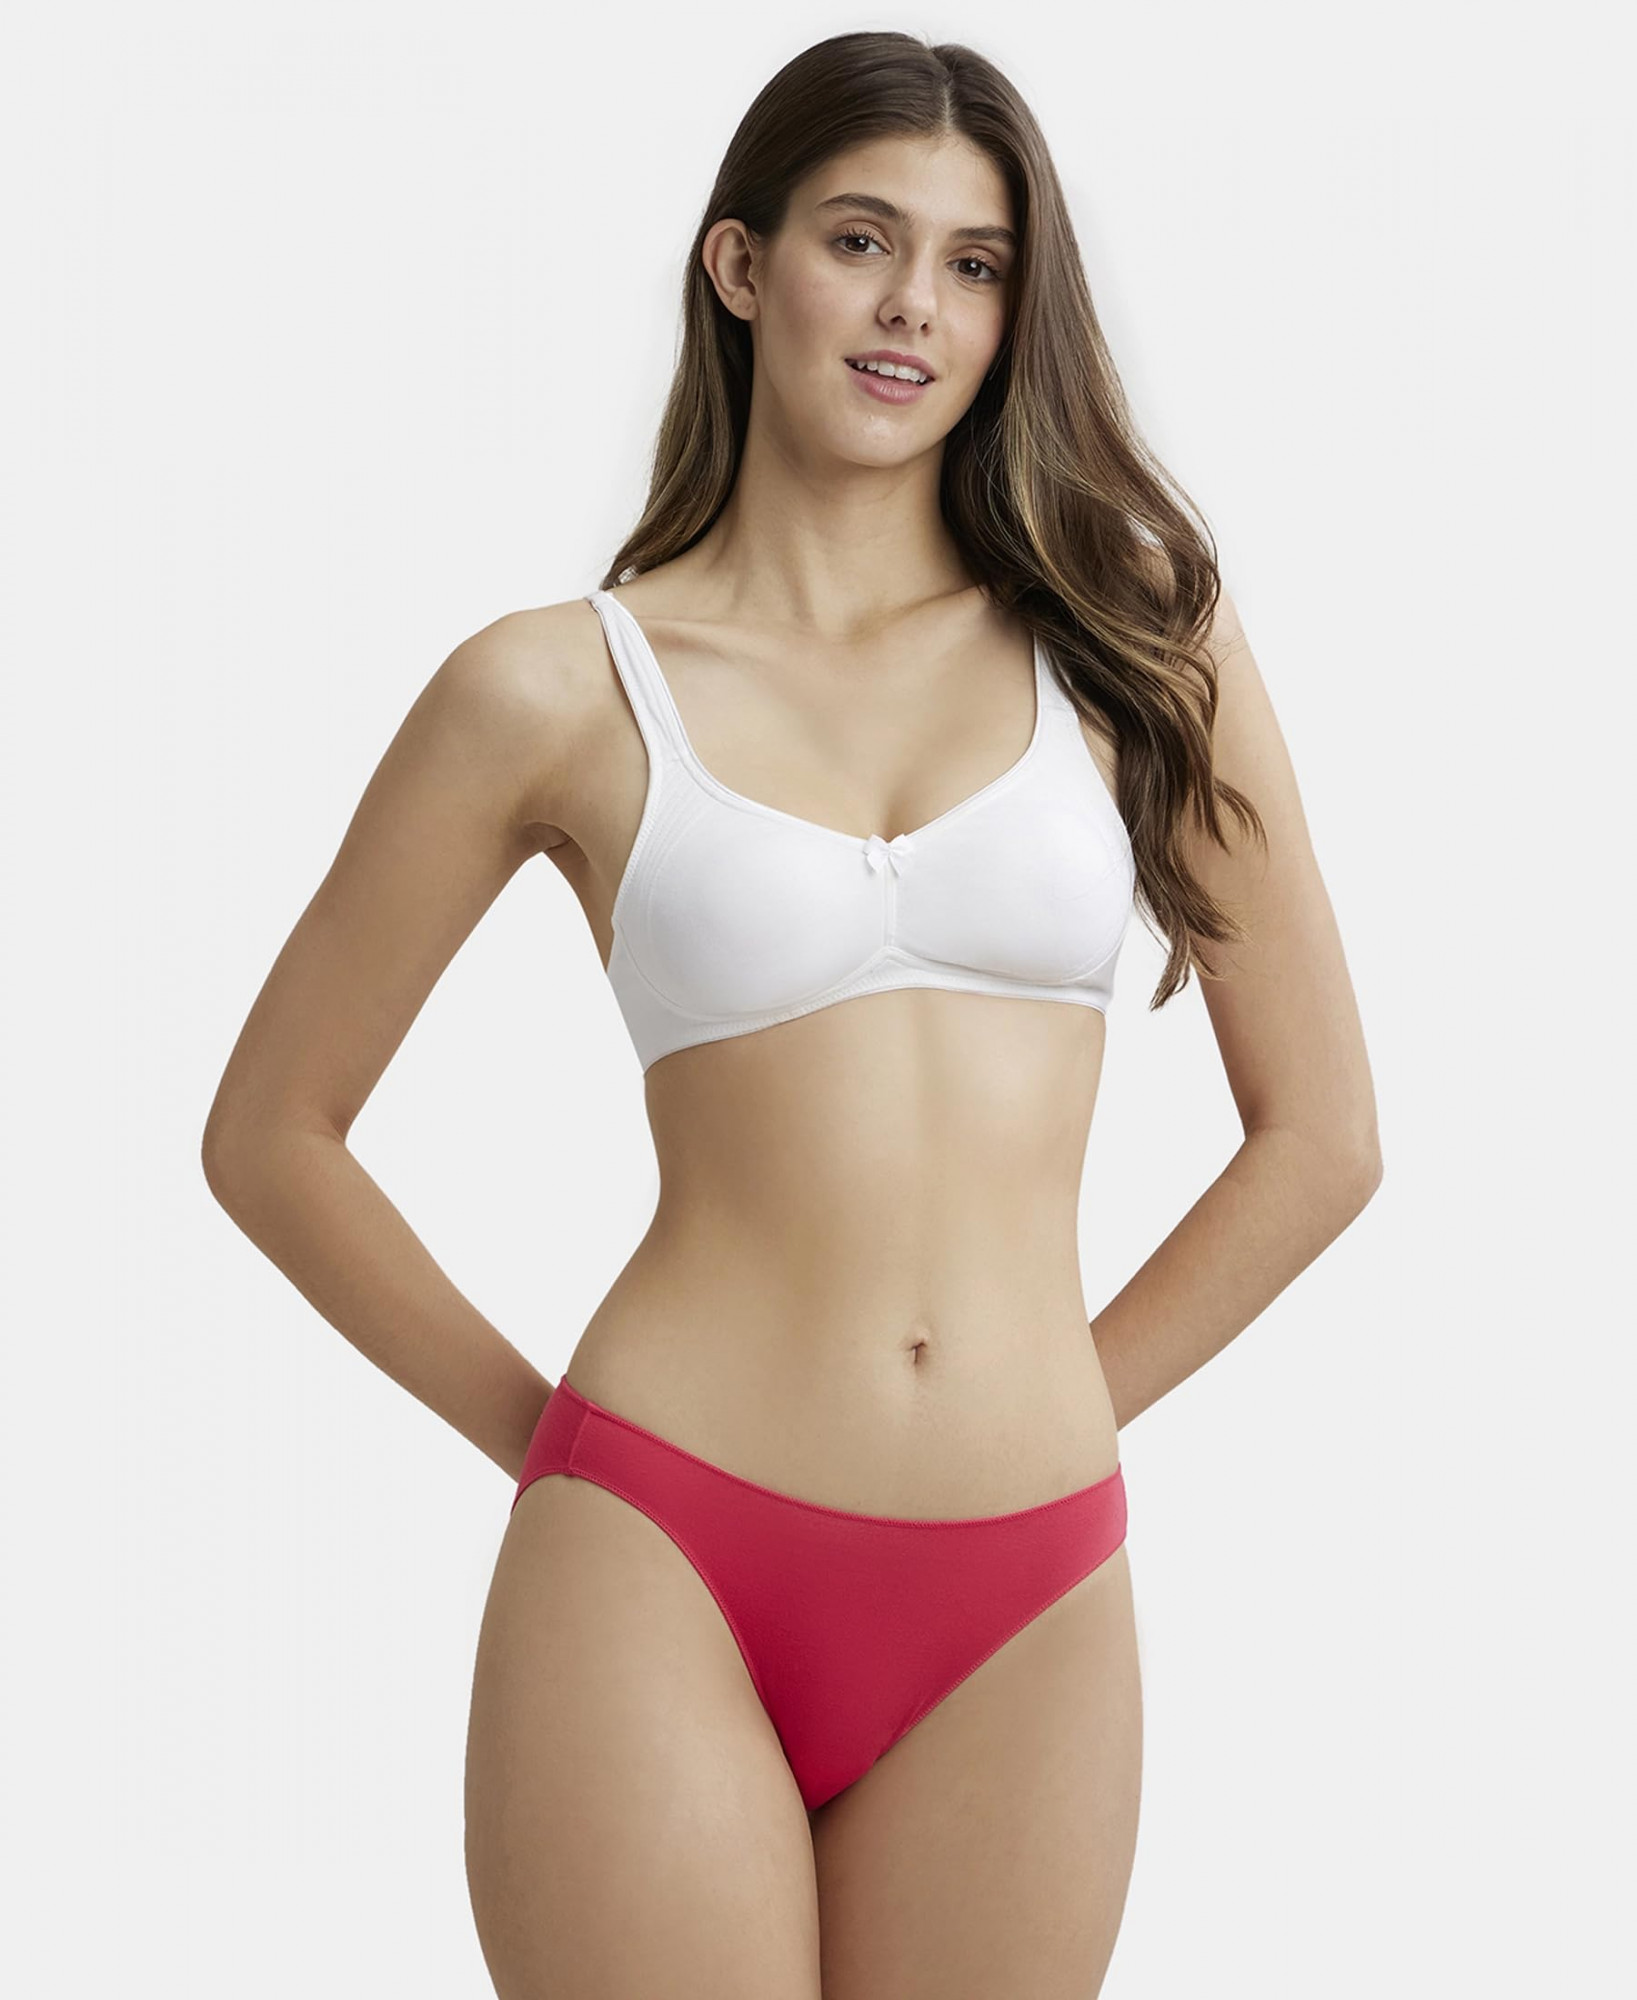 https://www.fastemi.com/uploads/fastemicom/products/jockey-1250-womenamp039s-wirefree-non-padded-super-combed-cotton-elastane-stretch-full-coverage-everyday-bra-with-contoured-shaper-panel-and-adjustable-strapswhite38d-134410989667114_l.jpg